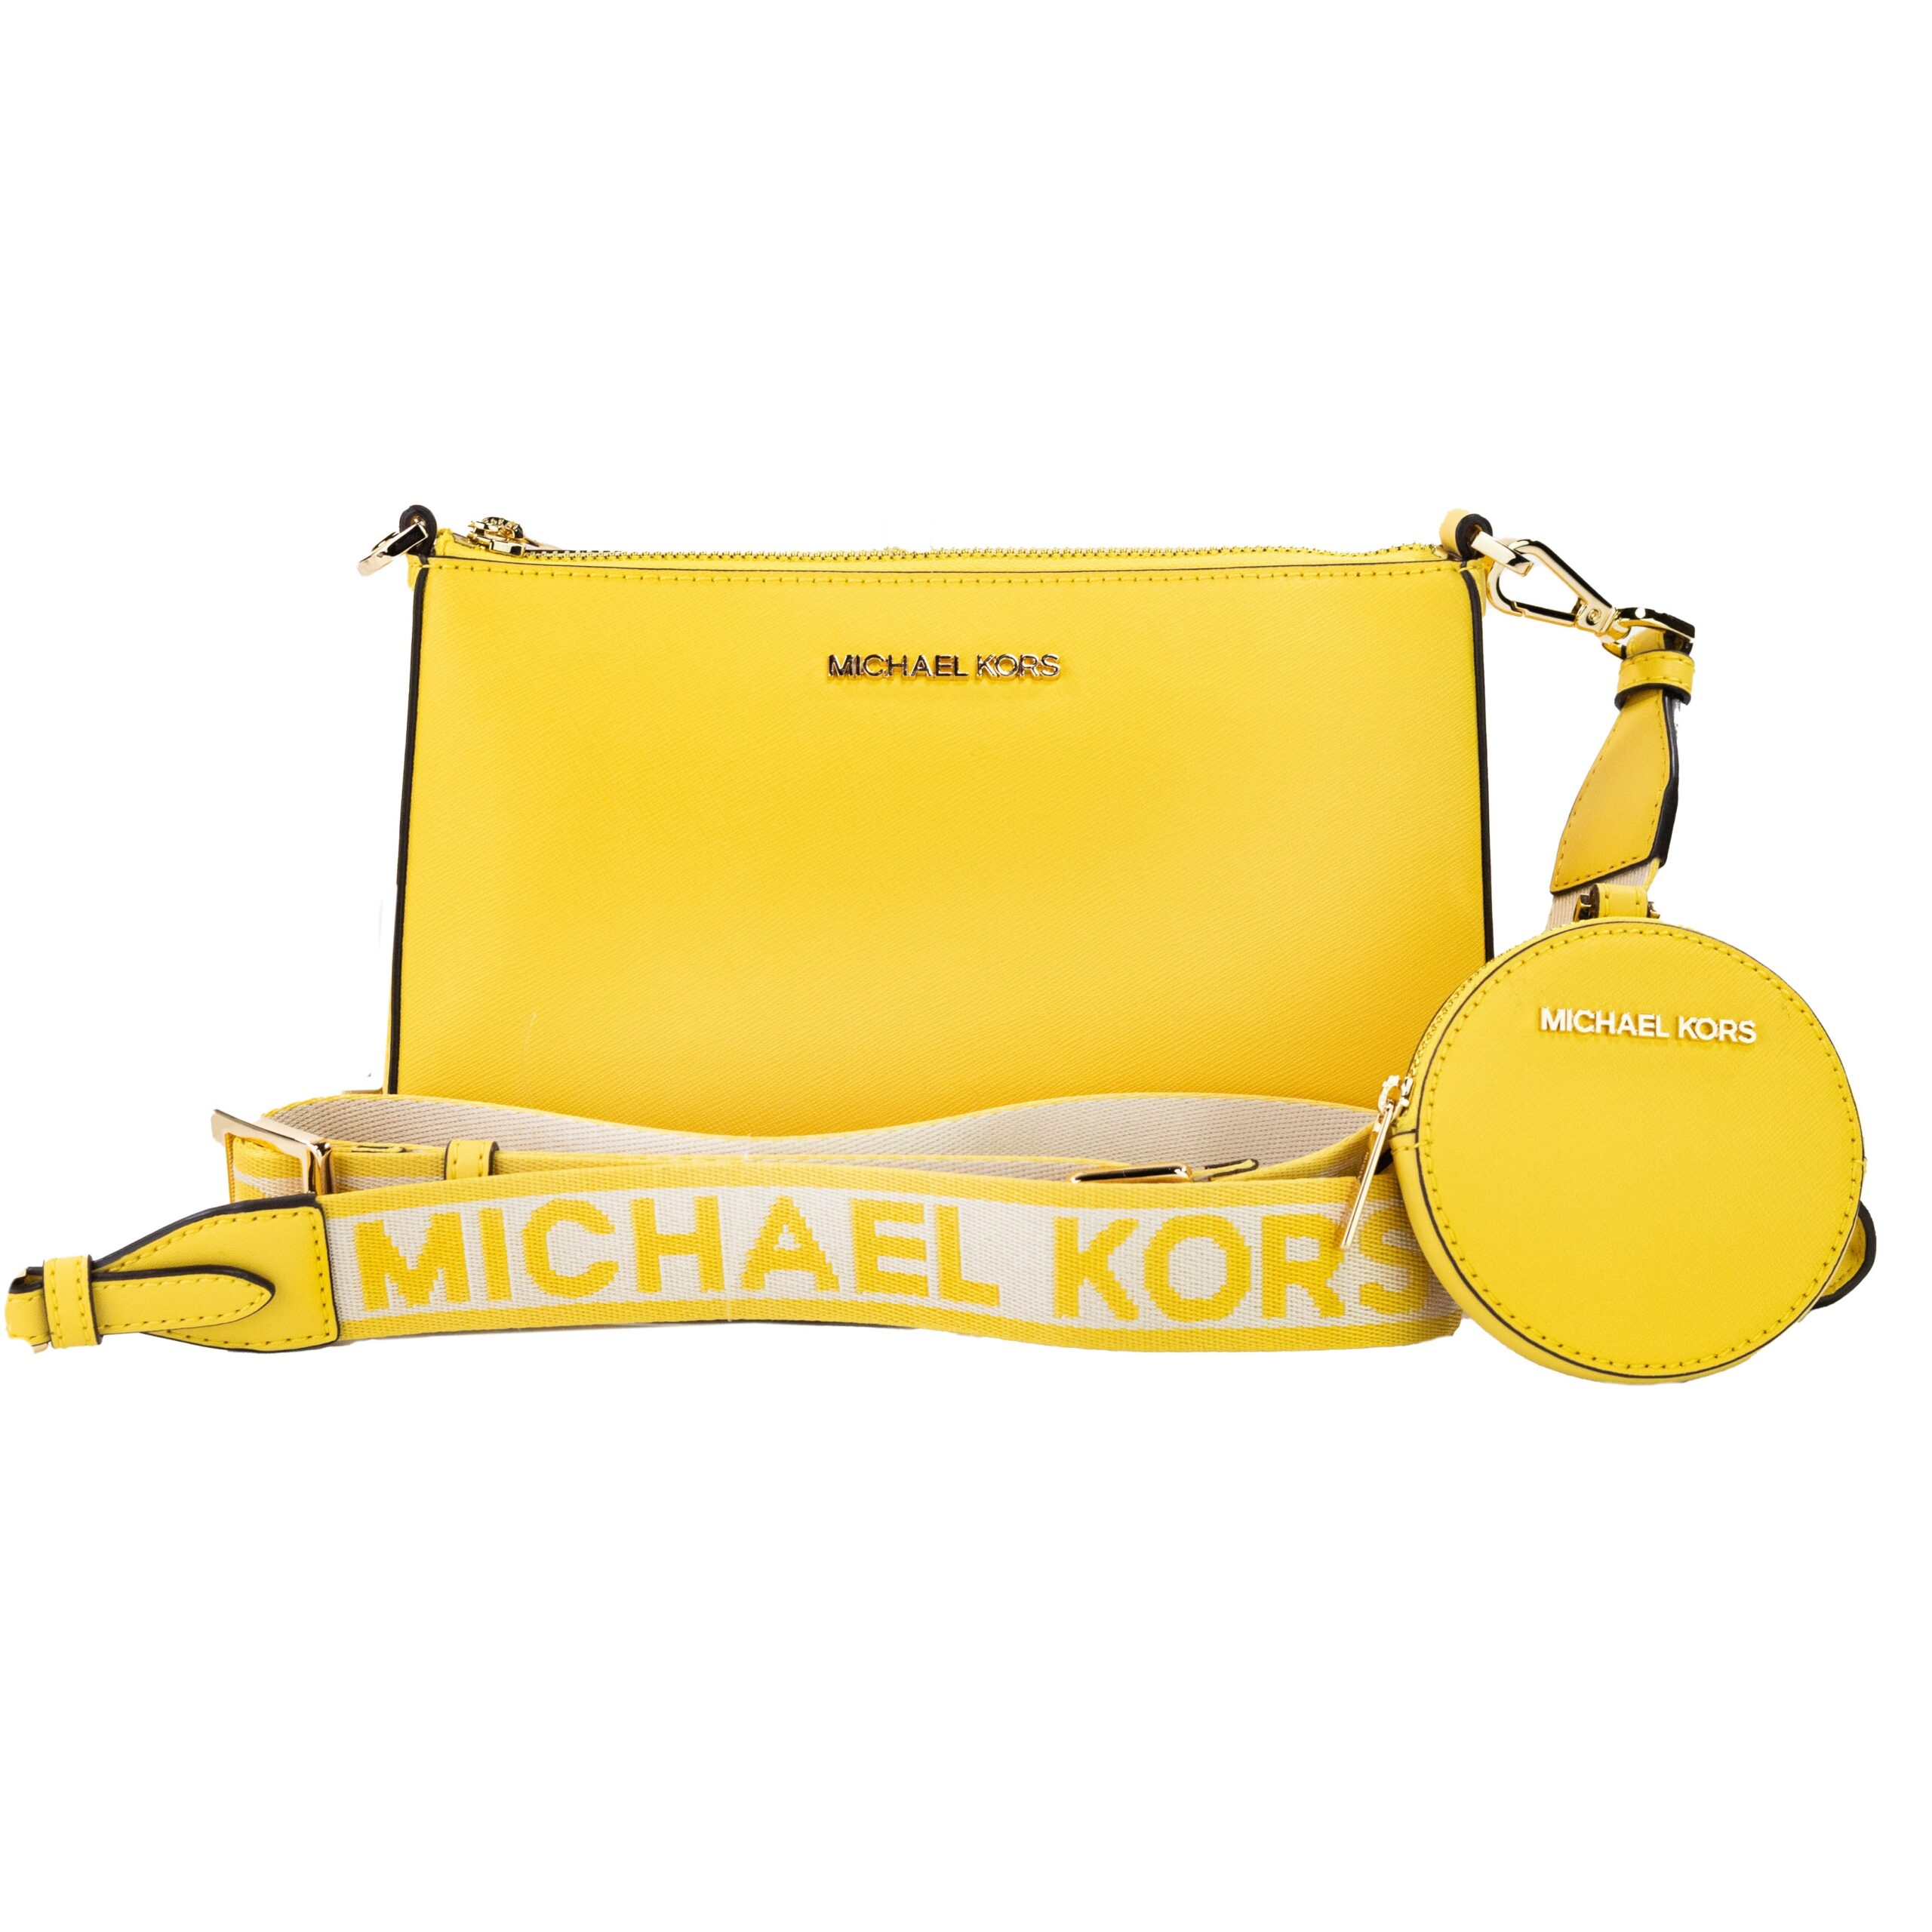 Jet Set Daffodil Vegan Crossbody Tech Attachment Bag Purse BY Michael Kors - Bags available at DOYUF